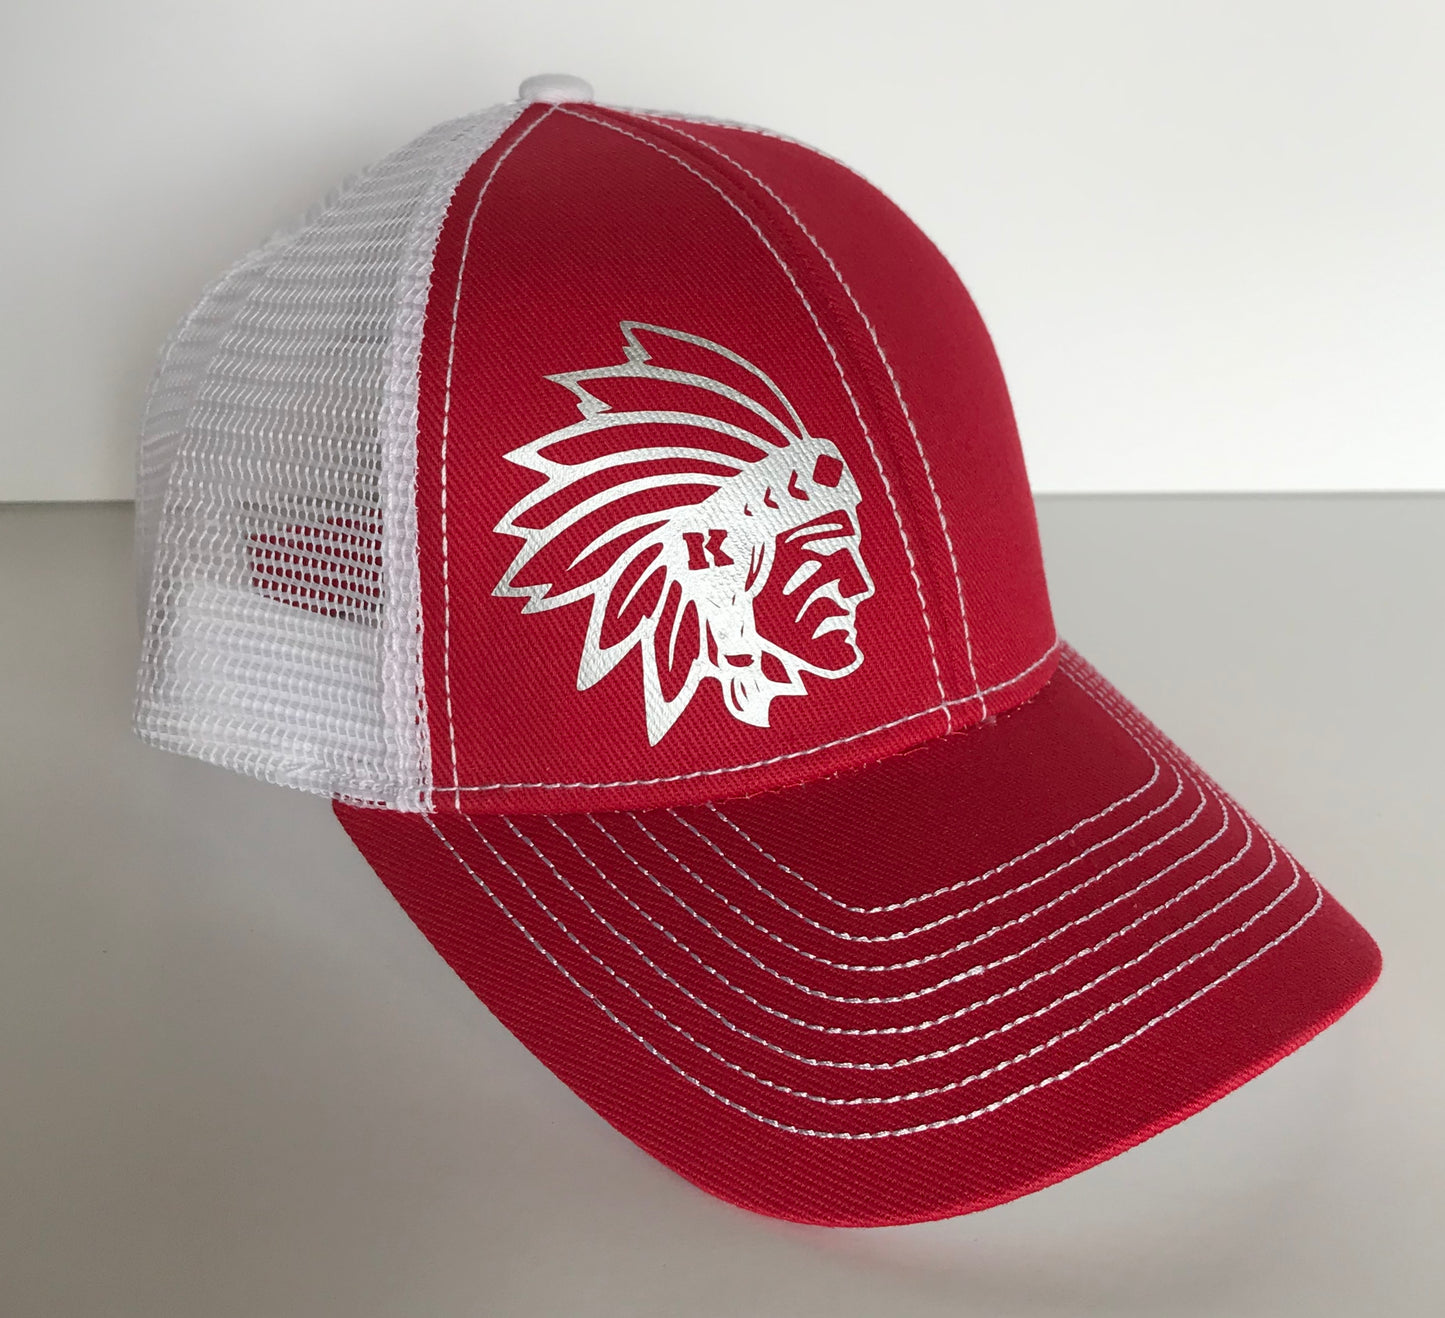 Low Profile Knox Redskins Hat - Adjustable - Red/White/Silver - Altern –  Tomahawk Custom